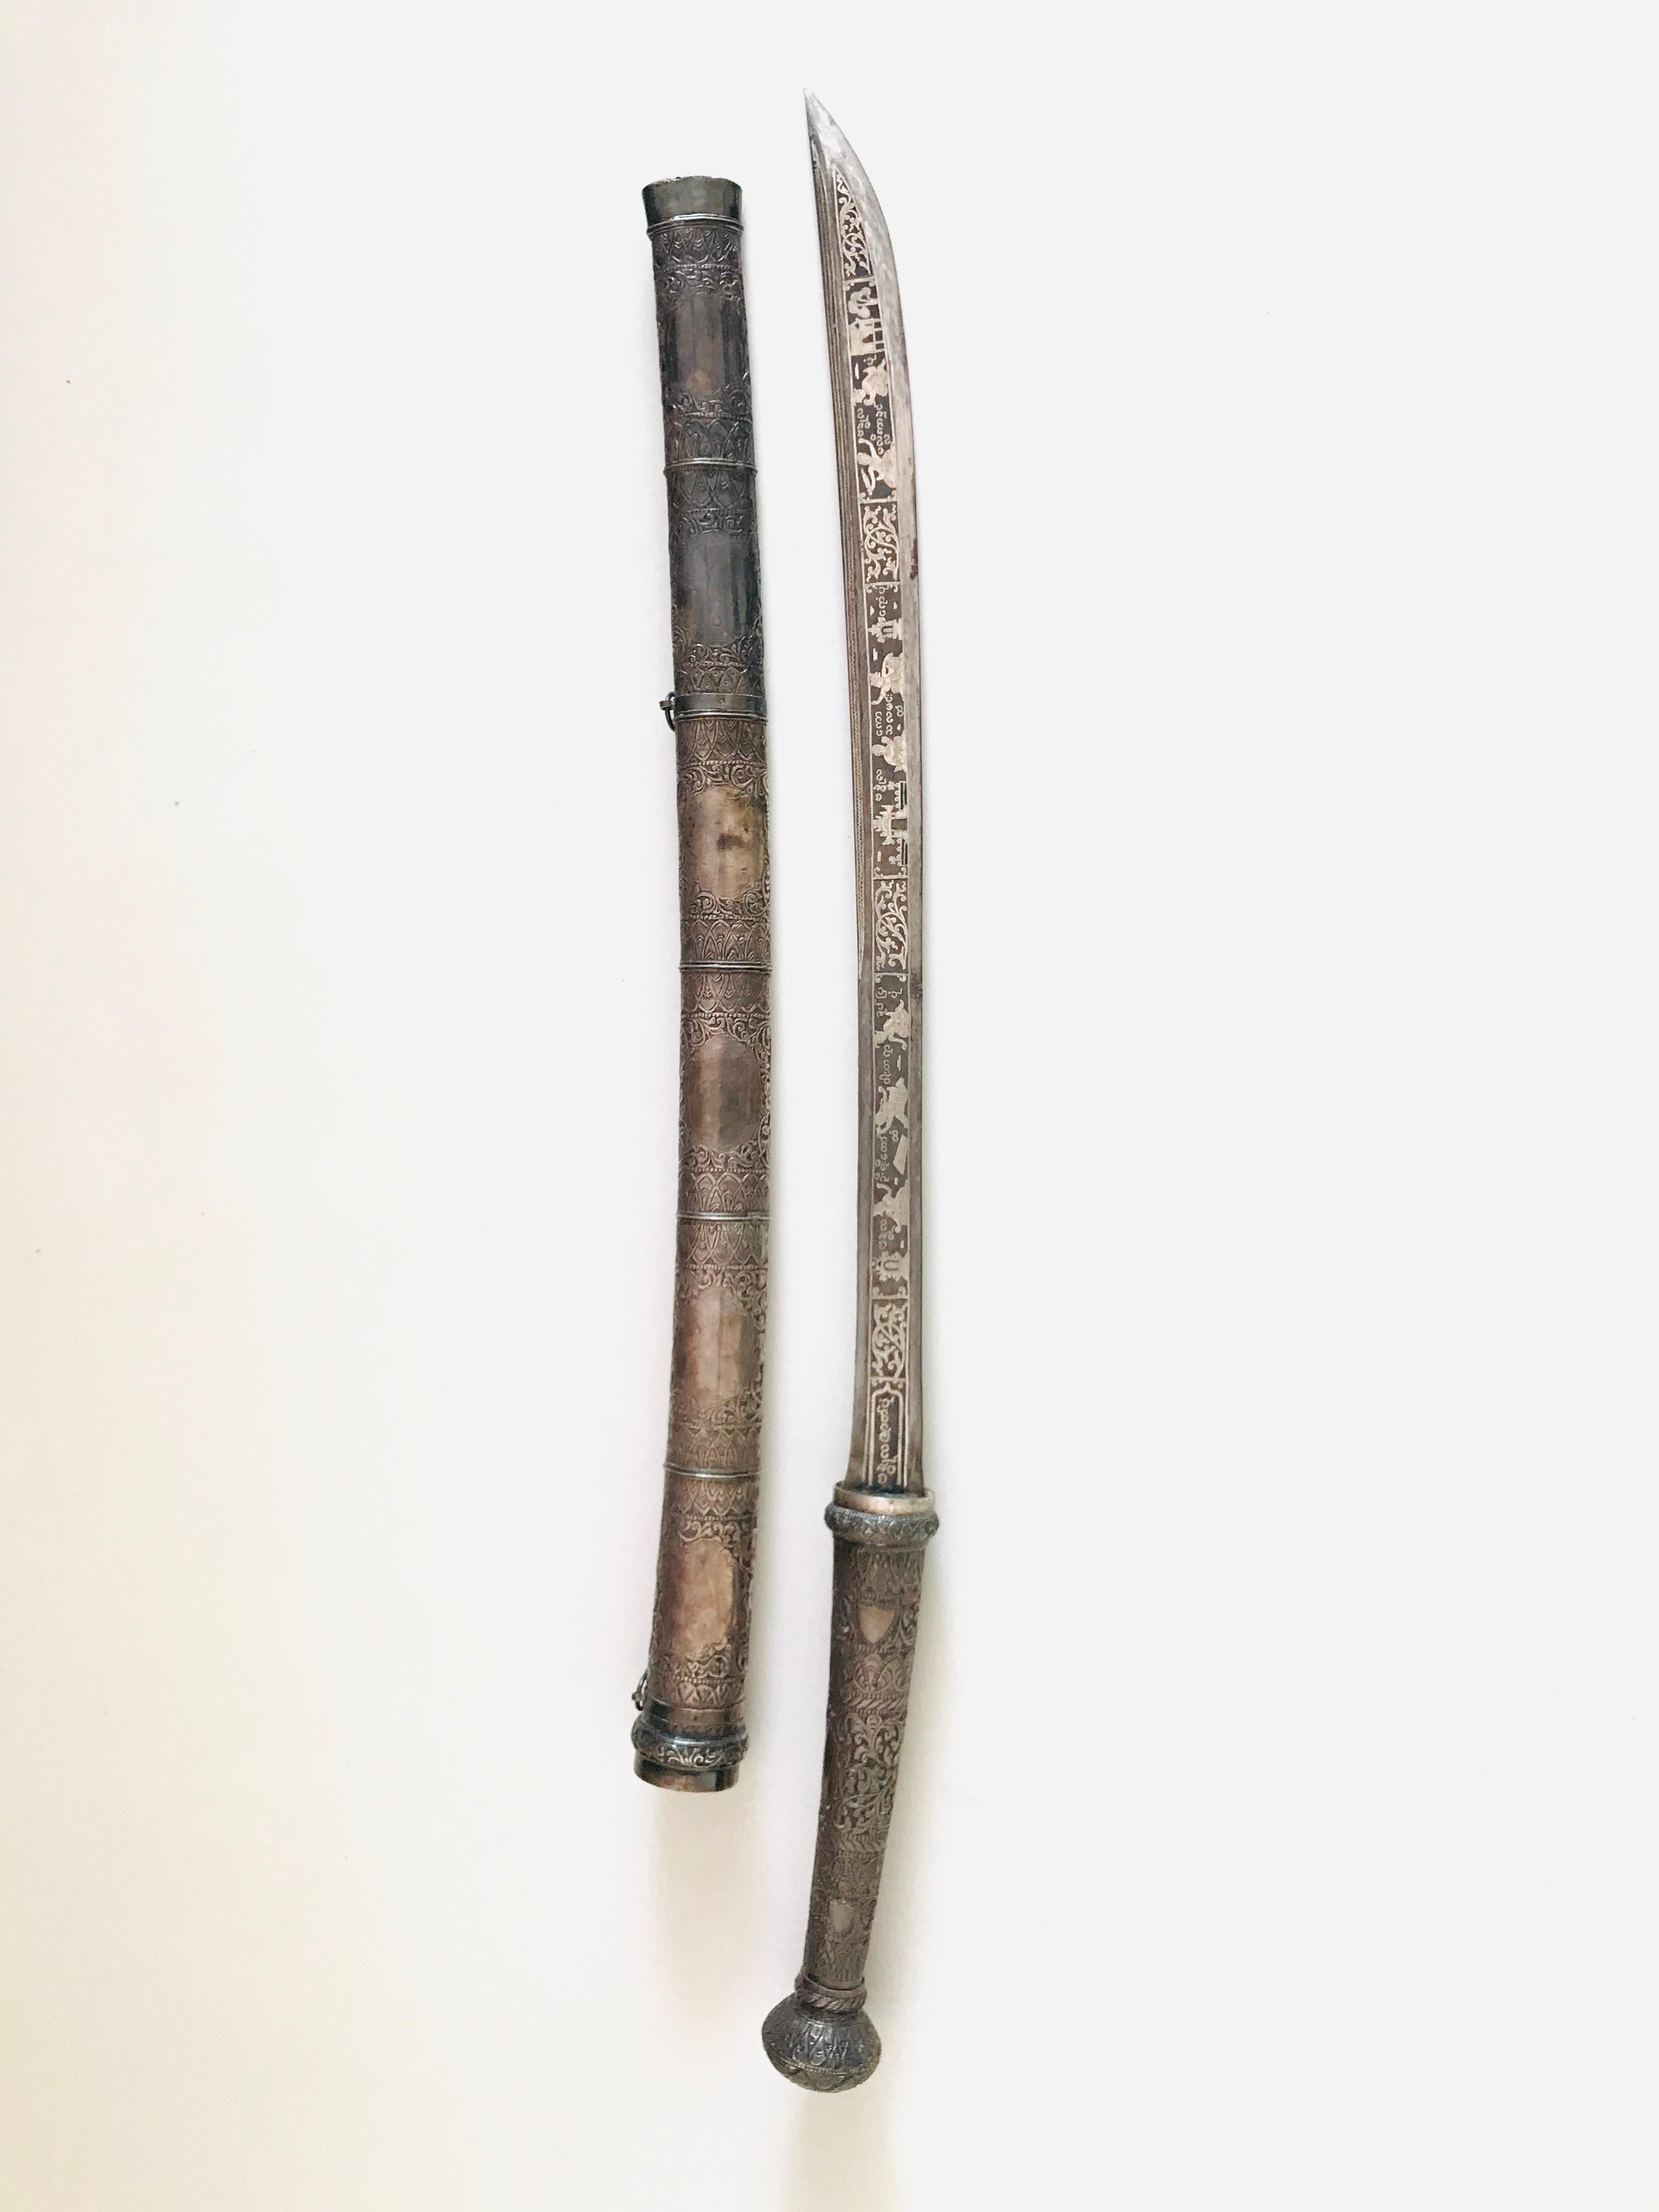 This very rare saber was made in the 19th century in south-east Europe. The saber has a handle and scabbard from silver. It is richly decorated and shaped. The damask blade shows very gentle miniature pictures from those ages. There are some